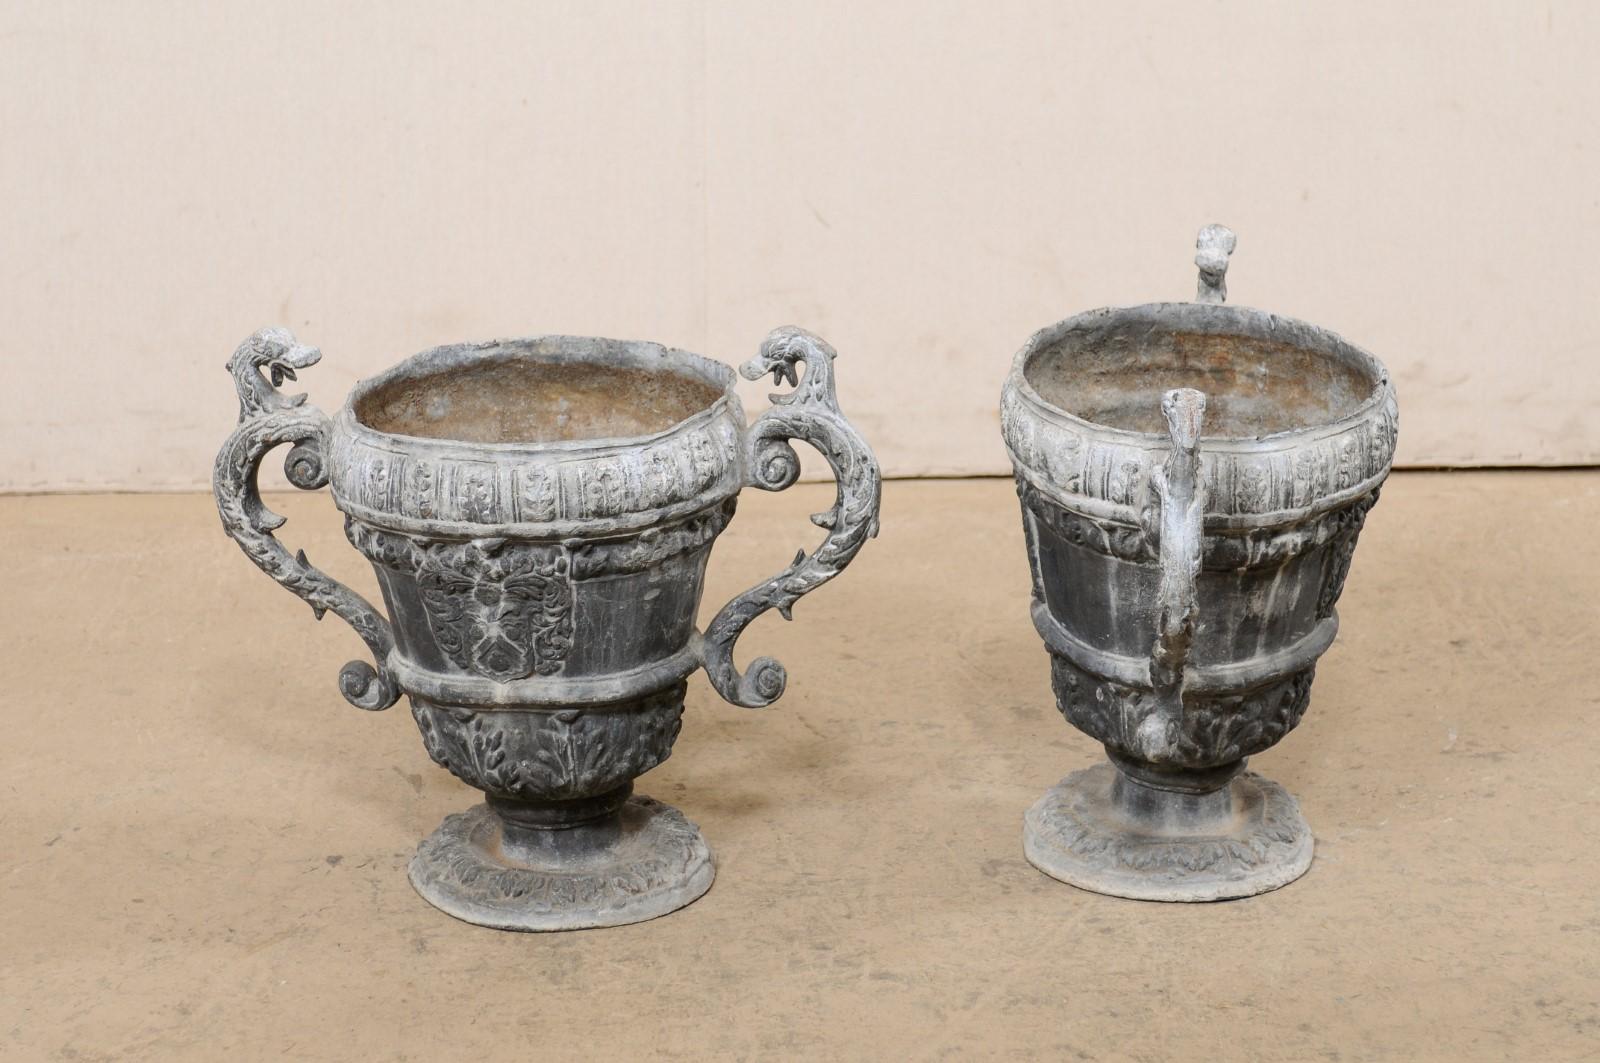 French Pair of 18th C. Decorative Lead Urn Planters for Garden Patio For Sale 6